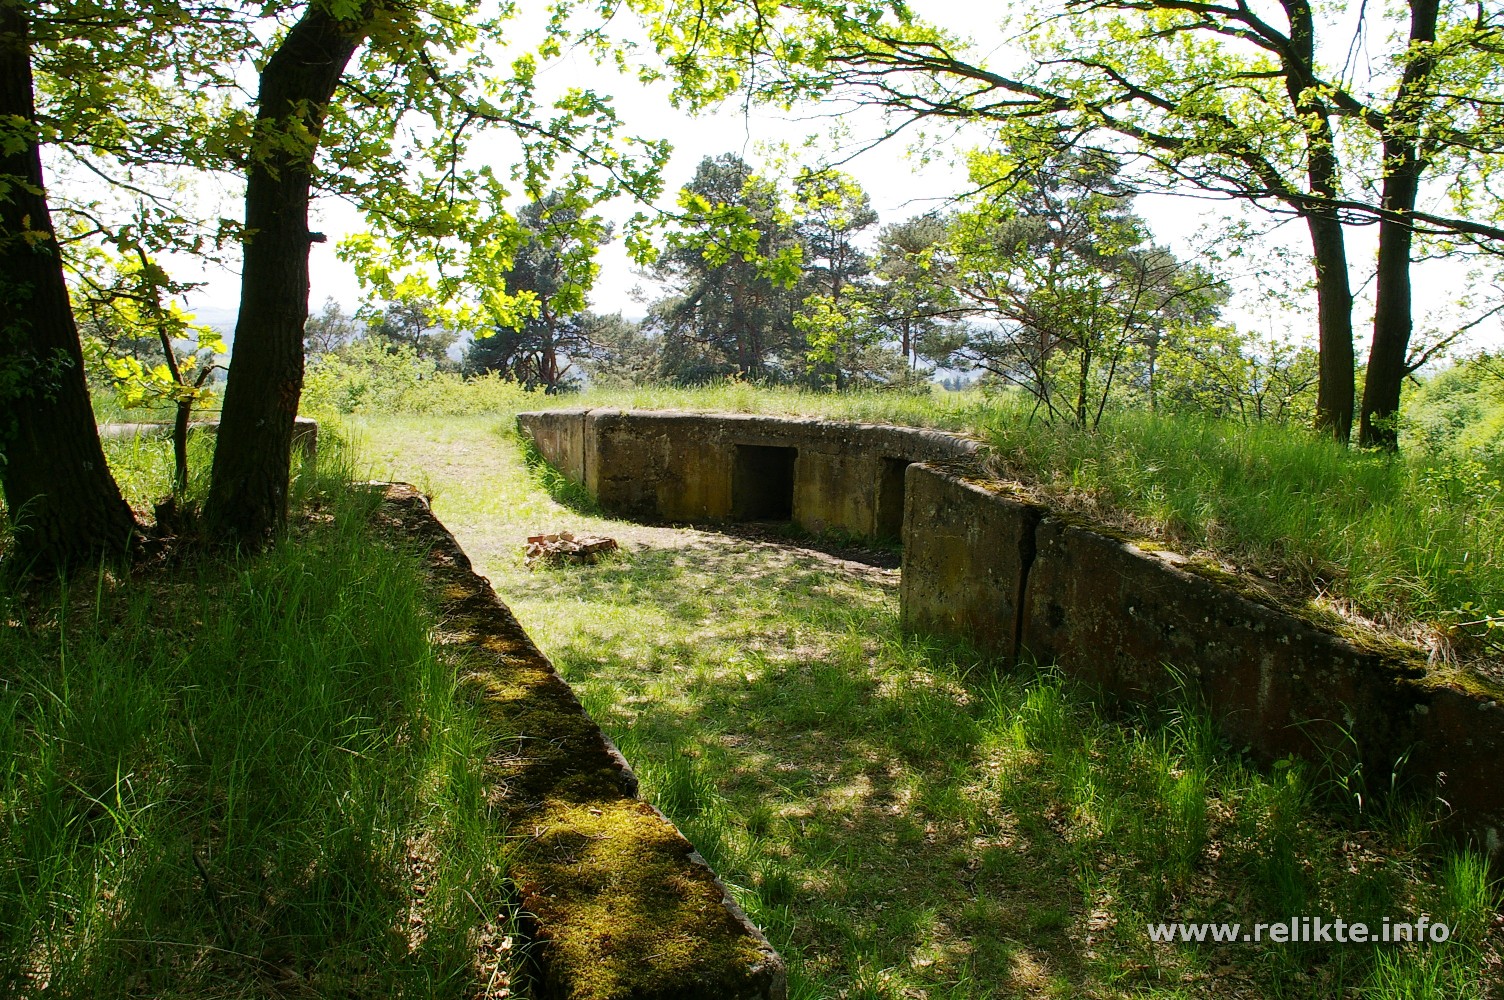  Remains of the flak installation at Kirspenich, Germany as it looks today